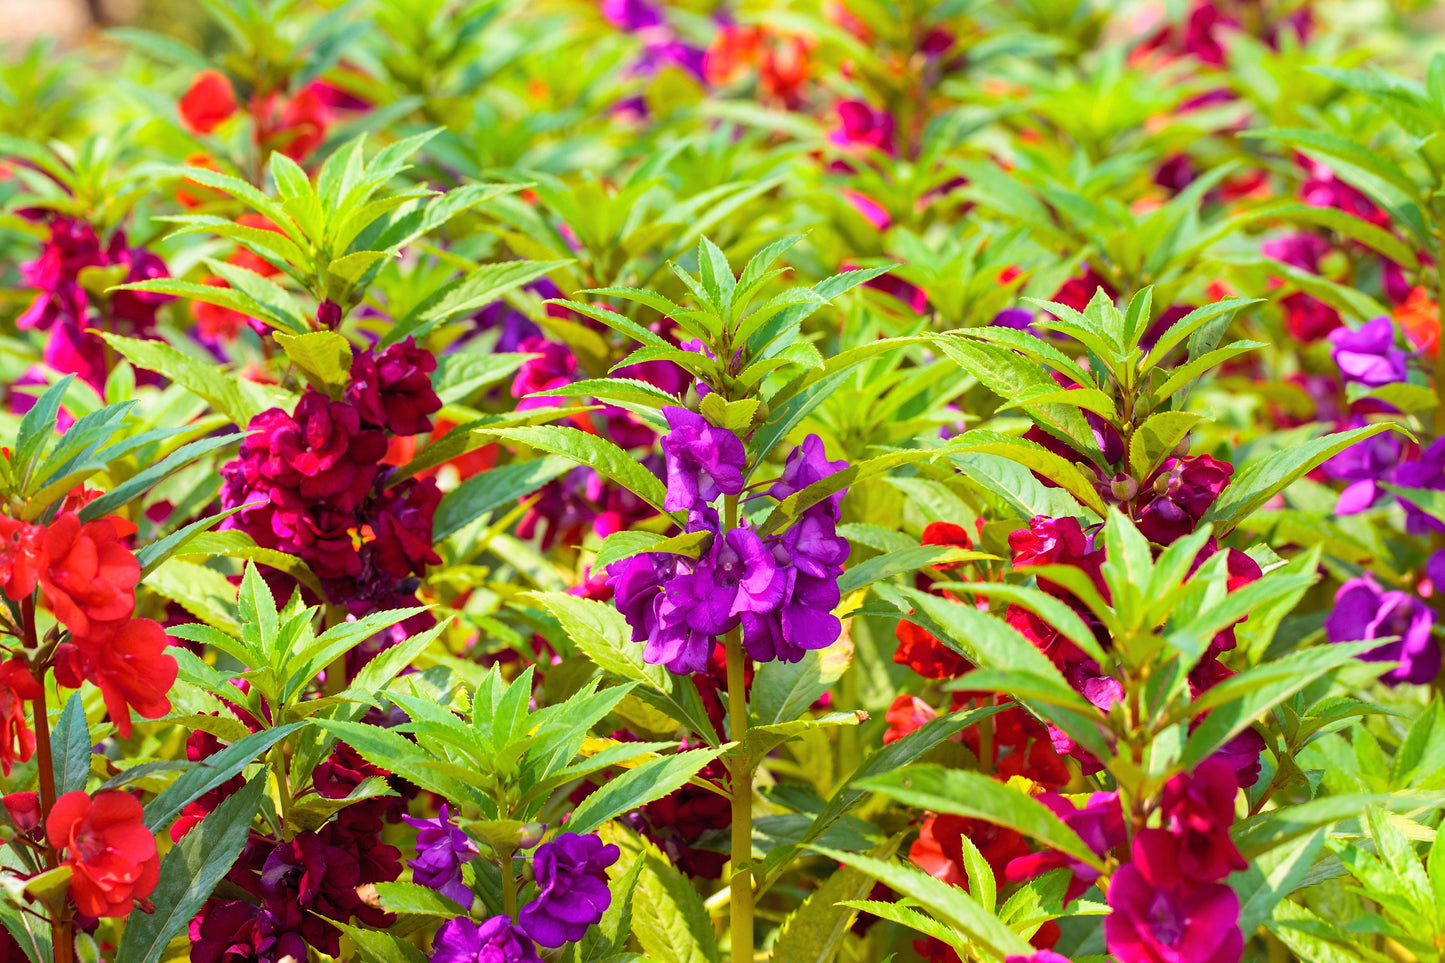 100 Mixed Dwarf TOM THUMB IMPATIENS Balsamina - Sun or Shade - Double Purple, Red, White, Pink, & Orange Flower Seeds